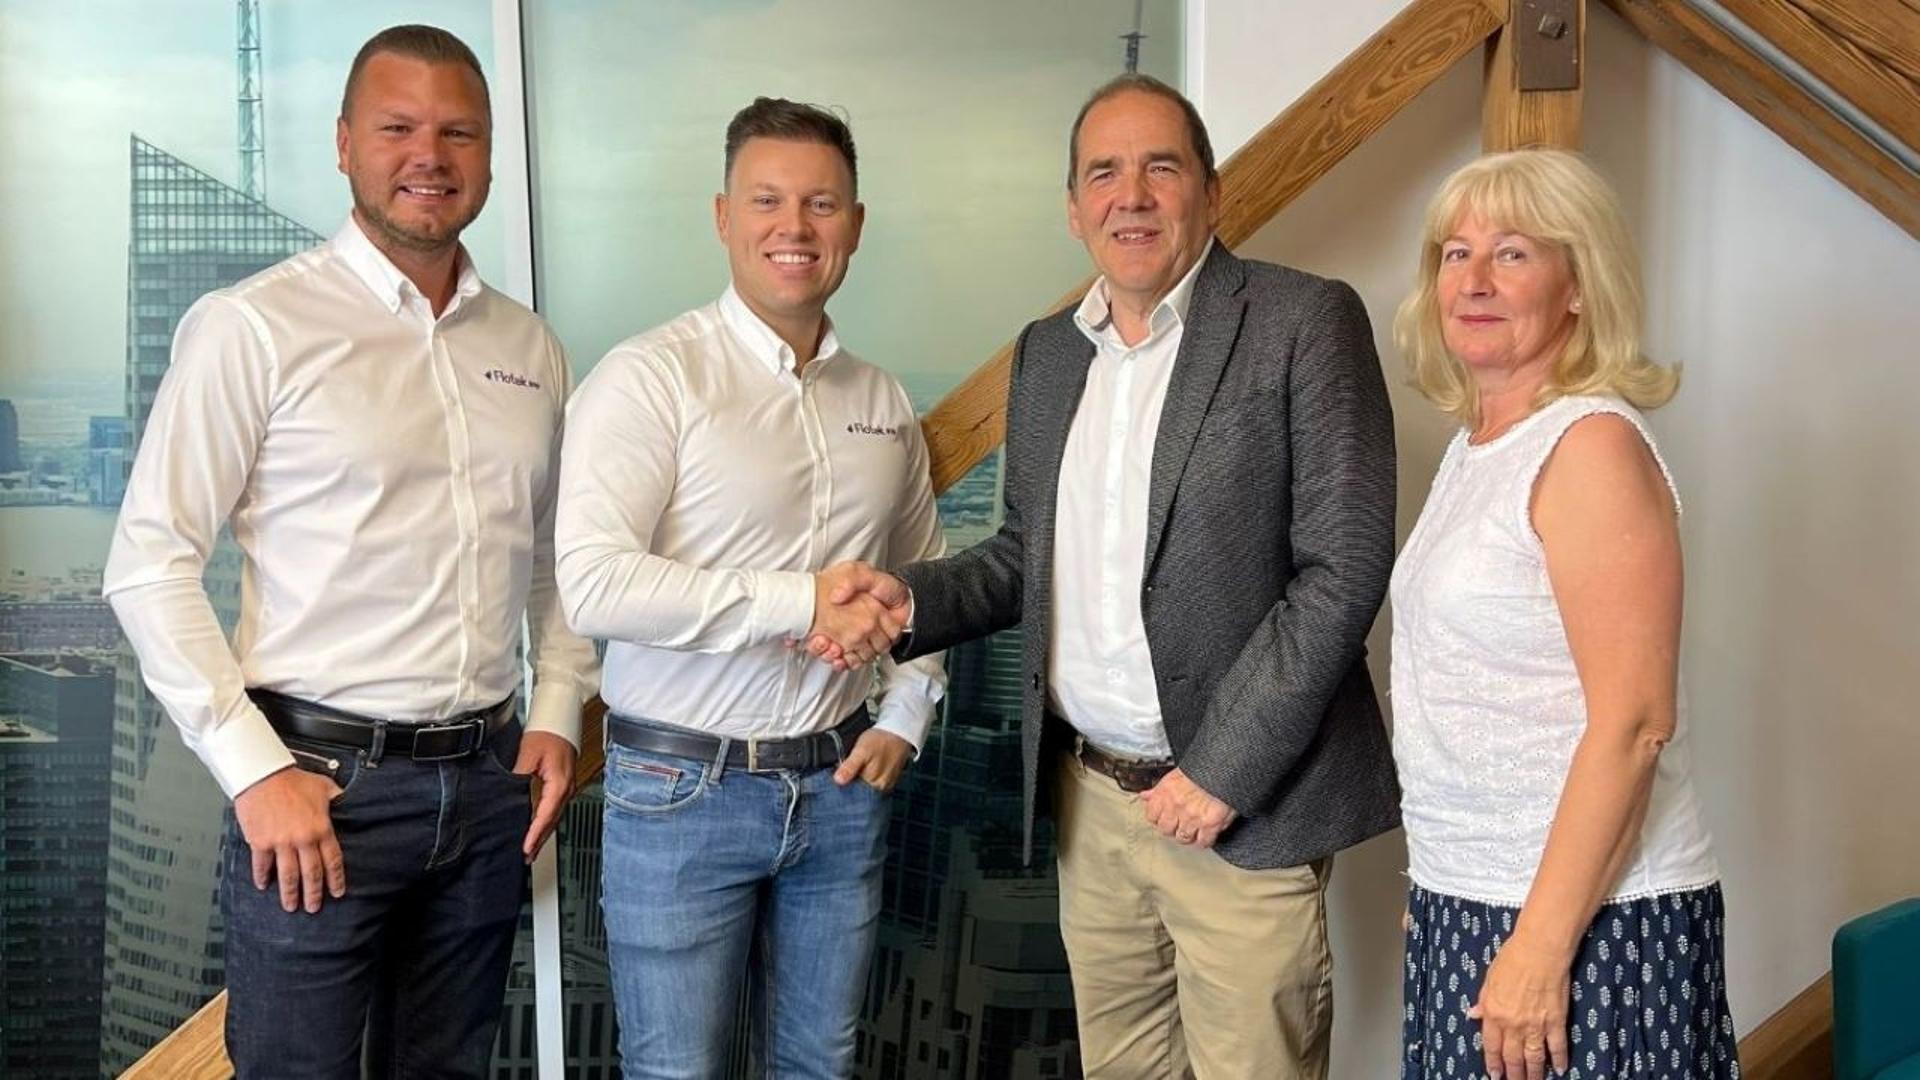 Flotek continues M&A spree with deal for Swansea telecoms firm